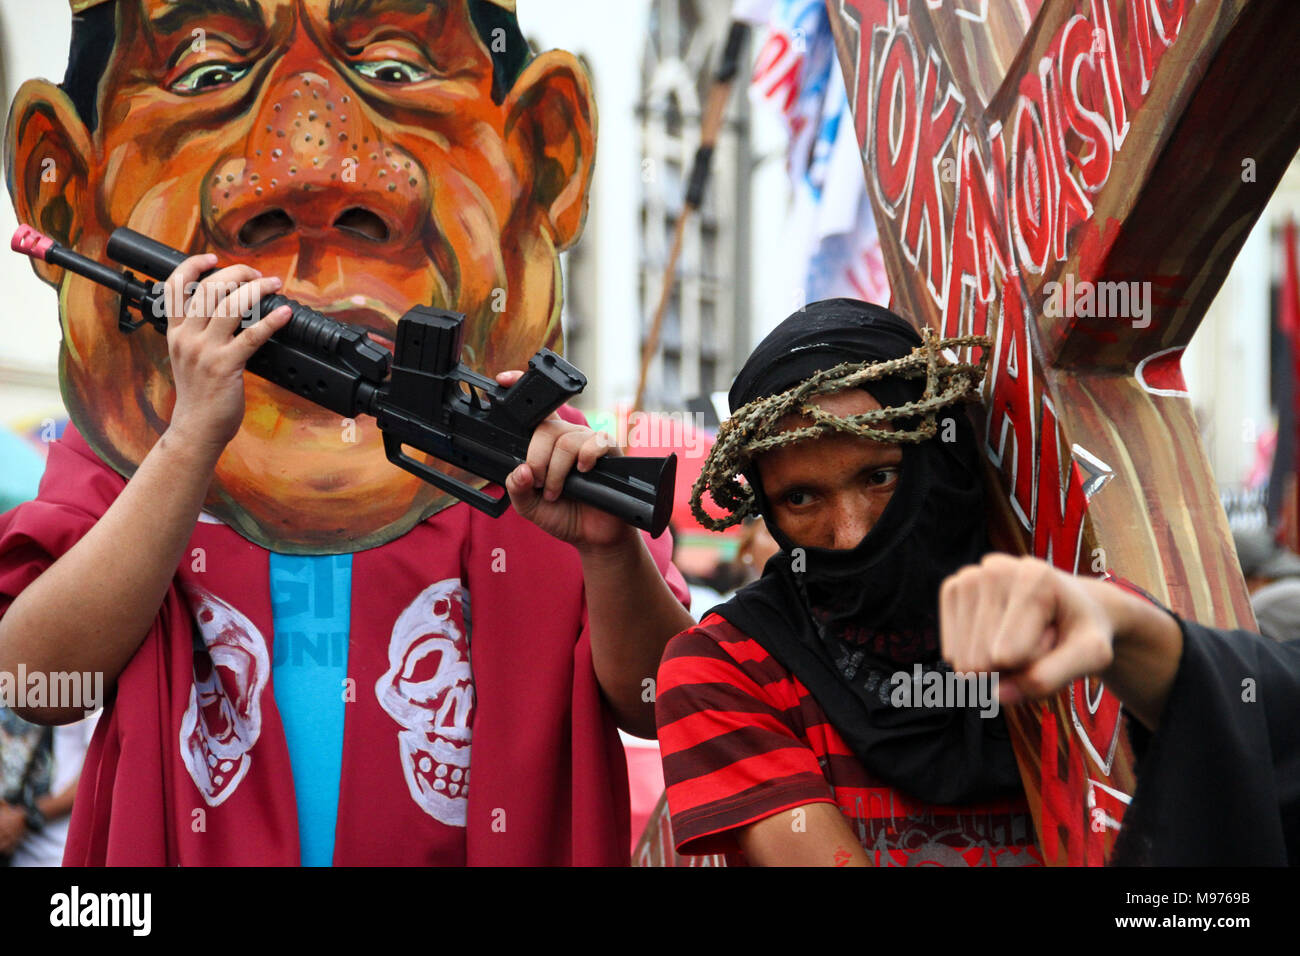 Manila, Philippines. 23rd March, 2018. A protester carries a cross while an activist wear a Duterte mask mock and hit him as they March towards Mendiola bridge in Manila. Activists slammed Duterte for the alleged double standard in his war on drugs, the crackdown on activists, and the recent designation of activists as terrorists according to the Malacanang. The March was held a few days before the Holy Week, with protesters carrying a cross to Mendiola, Manila. Credit: SOPA Images Limited/Alamy Live News Stock Photo